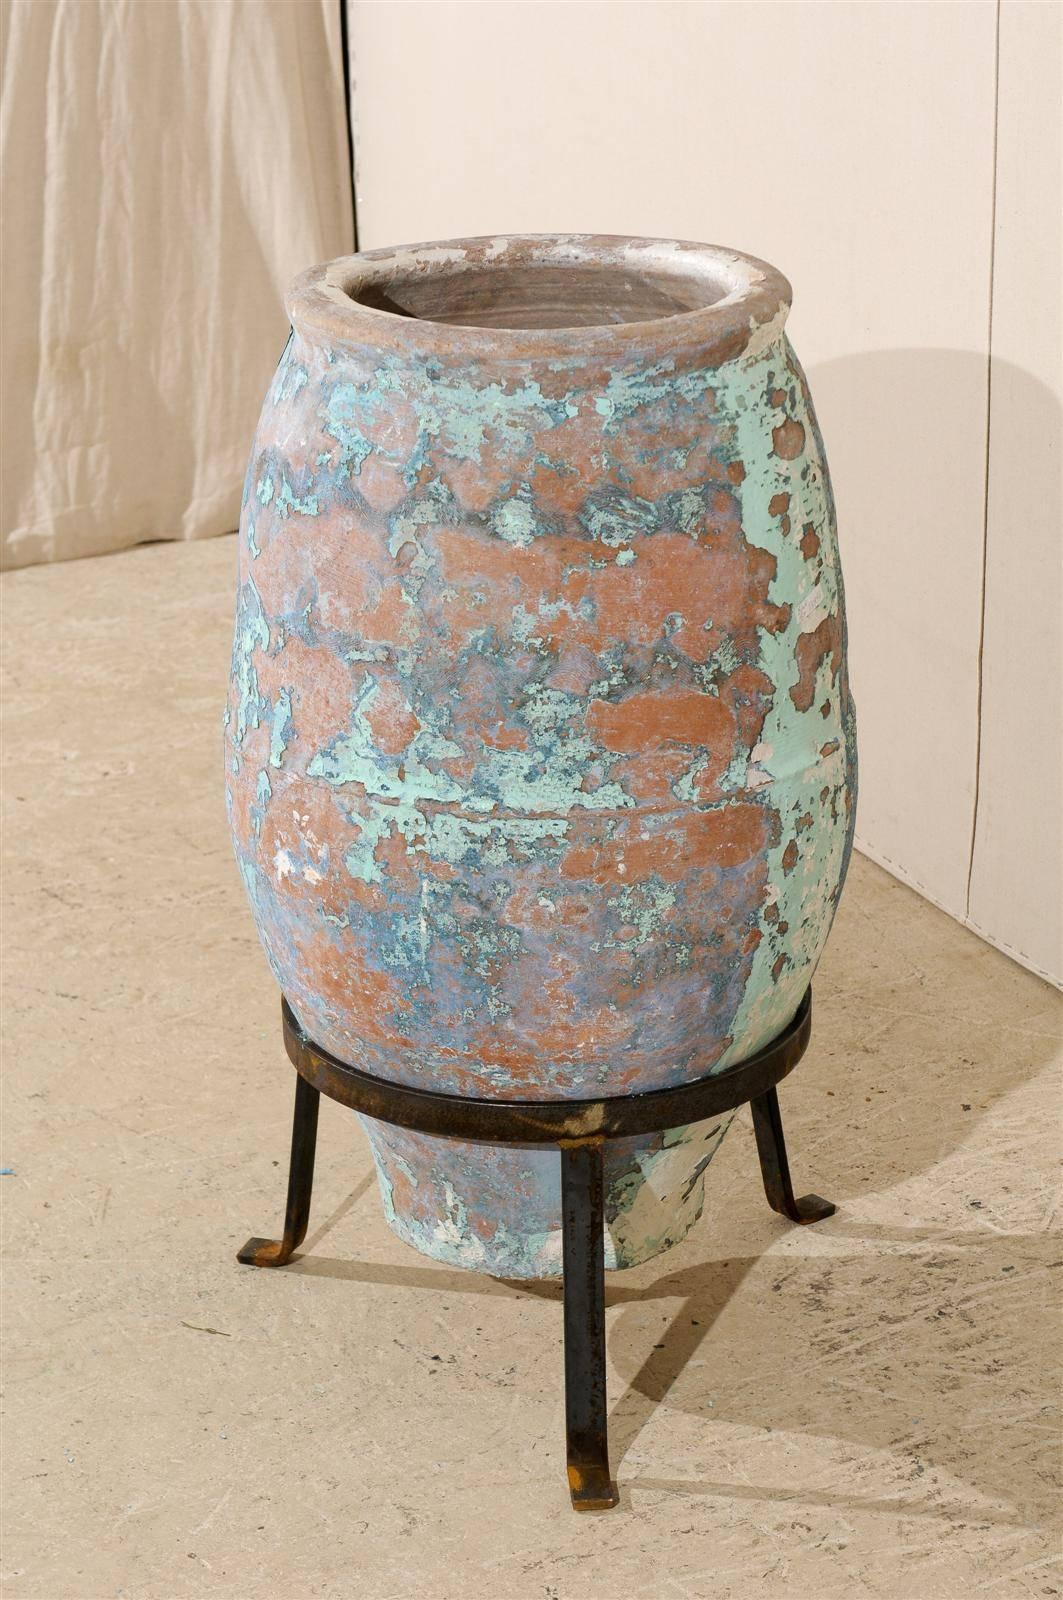 Painted Aged Spanish Terracotta Olive Jar from the Mid-19th C. with Traces of Blue Paint For Sale